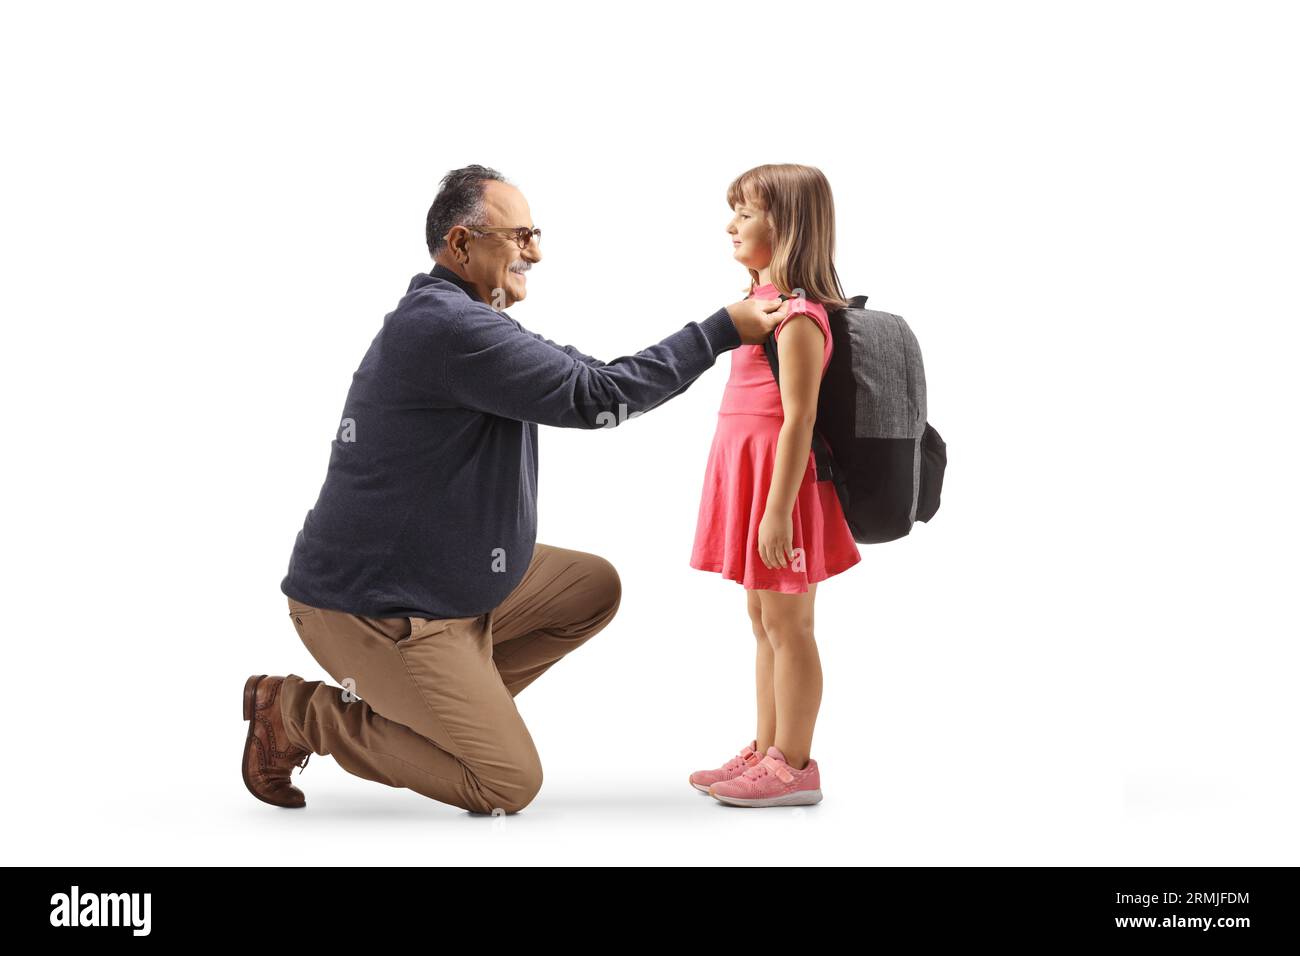 Full length profile shot of a mature man helping a child to put a backpack on isolated on white background Stock Photo